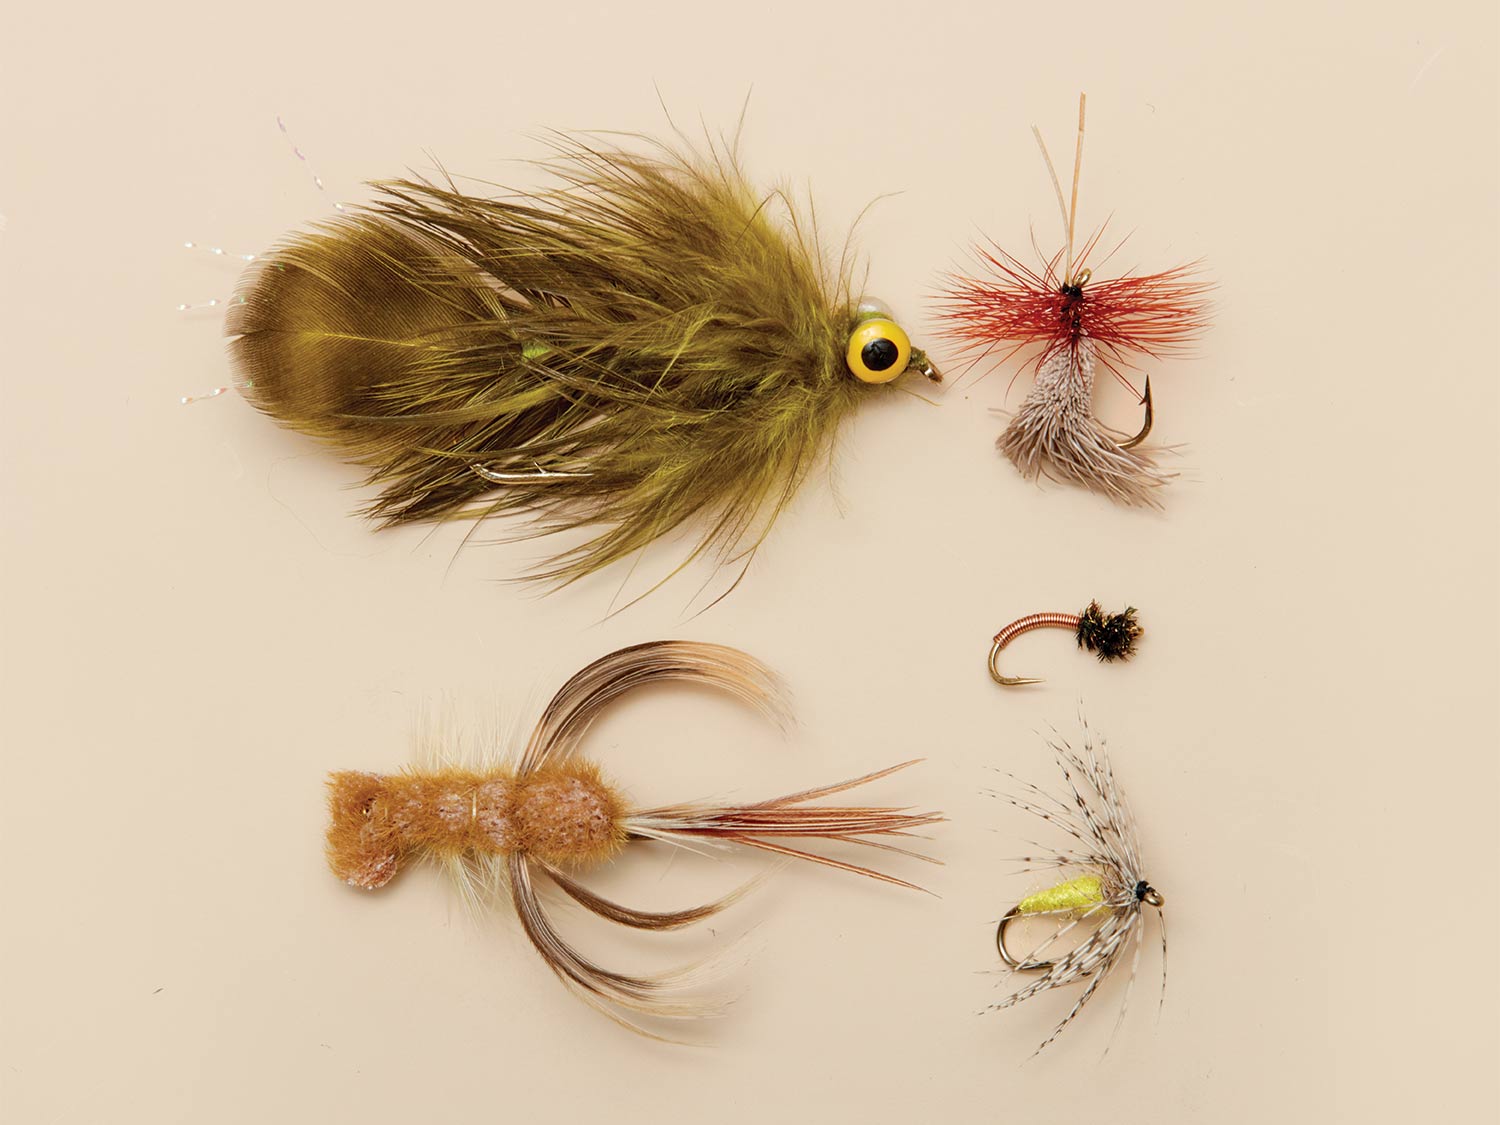 The 12 Best Dry Flies: Patterns and Strategies for Trout Fishing